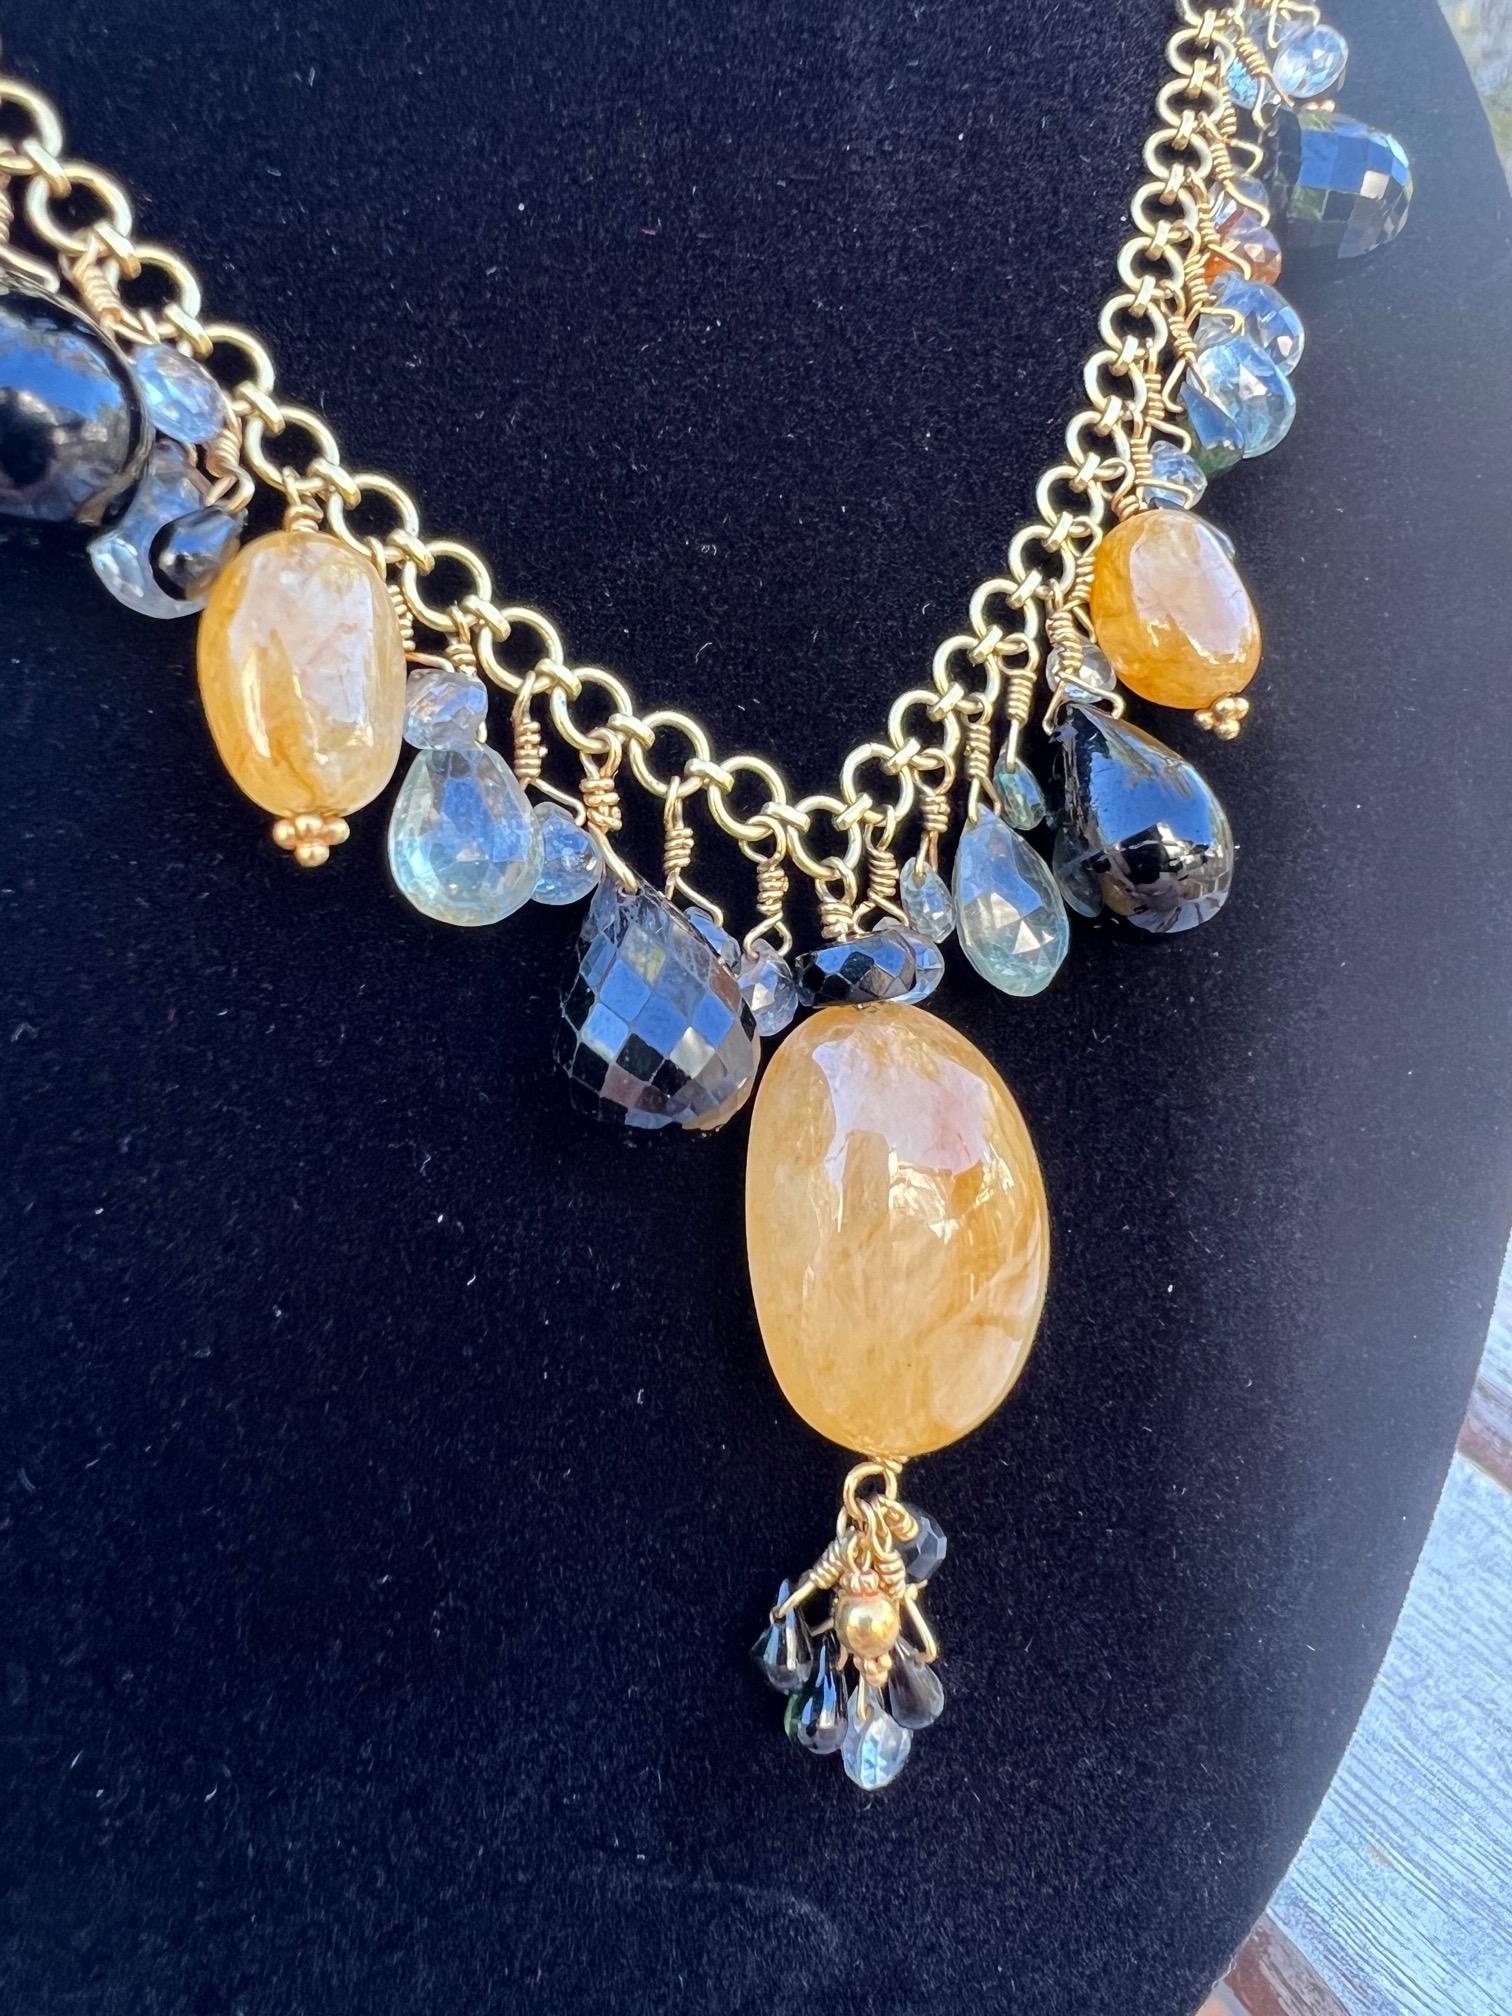 One of a kind multi gemstone necklace by Laura Gibson.  The details and craftsmanship on this necklace are exception.  The artist passed away in 2015.  A bio into her career and work is shared below. 

Polished orange Citrine
Balck Spinel
Blue